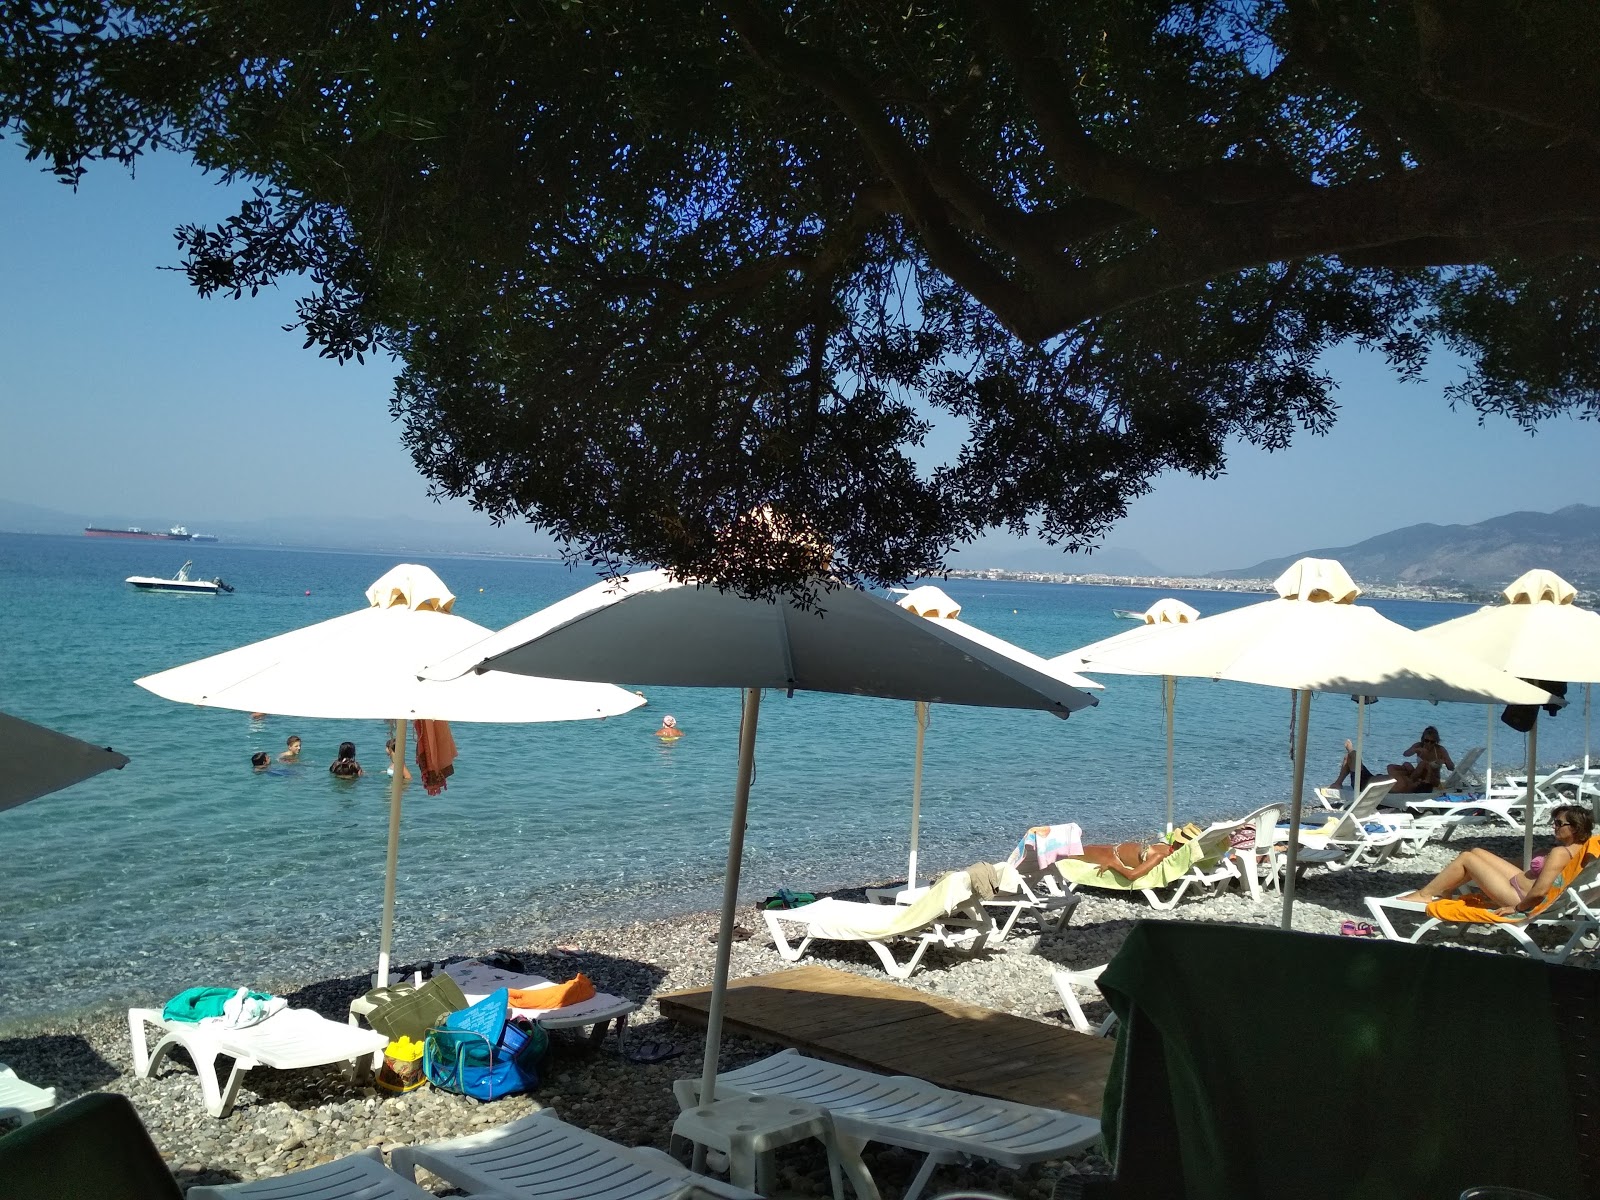 Photo of Paralia Verga - popular place among relax connoisseurs